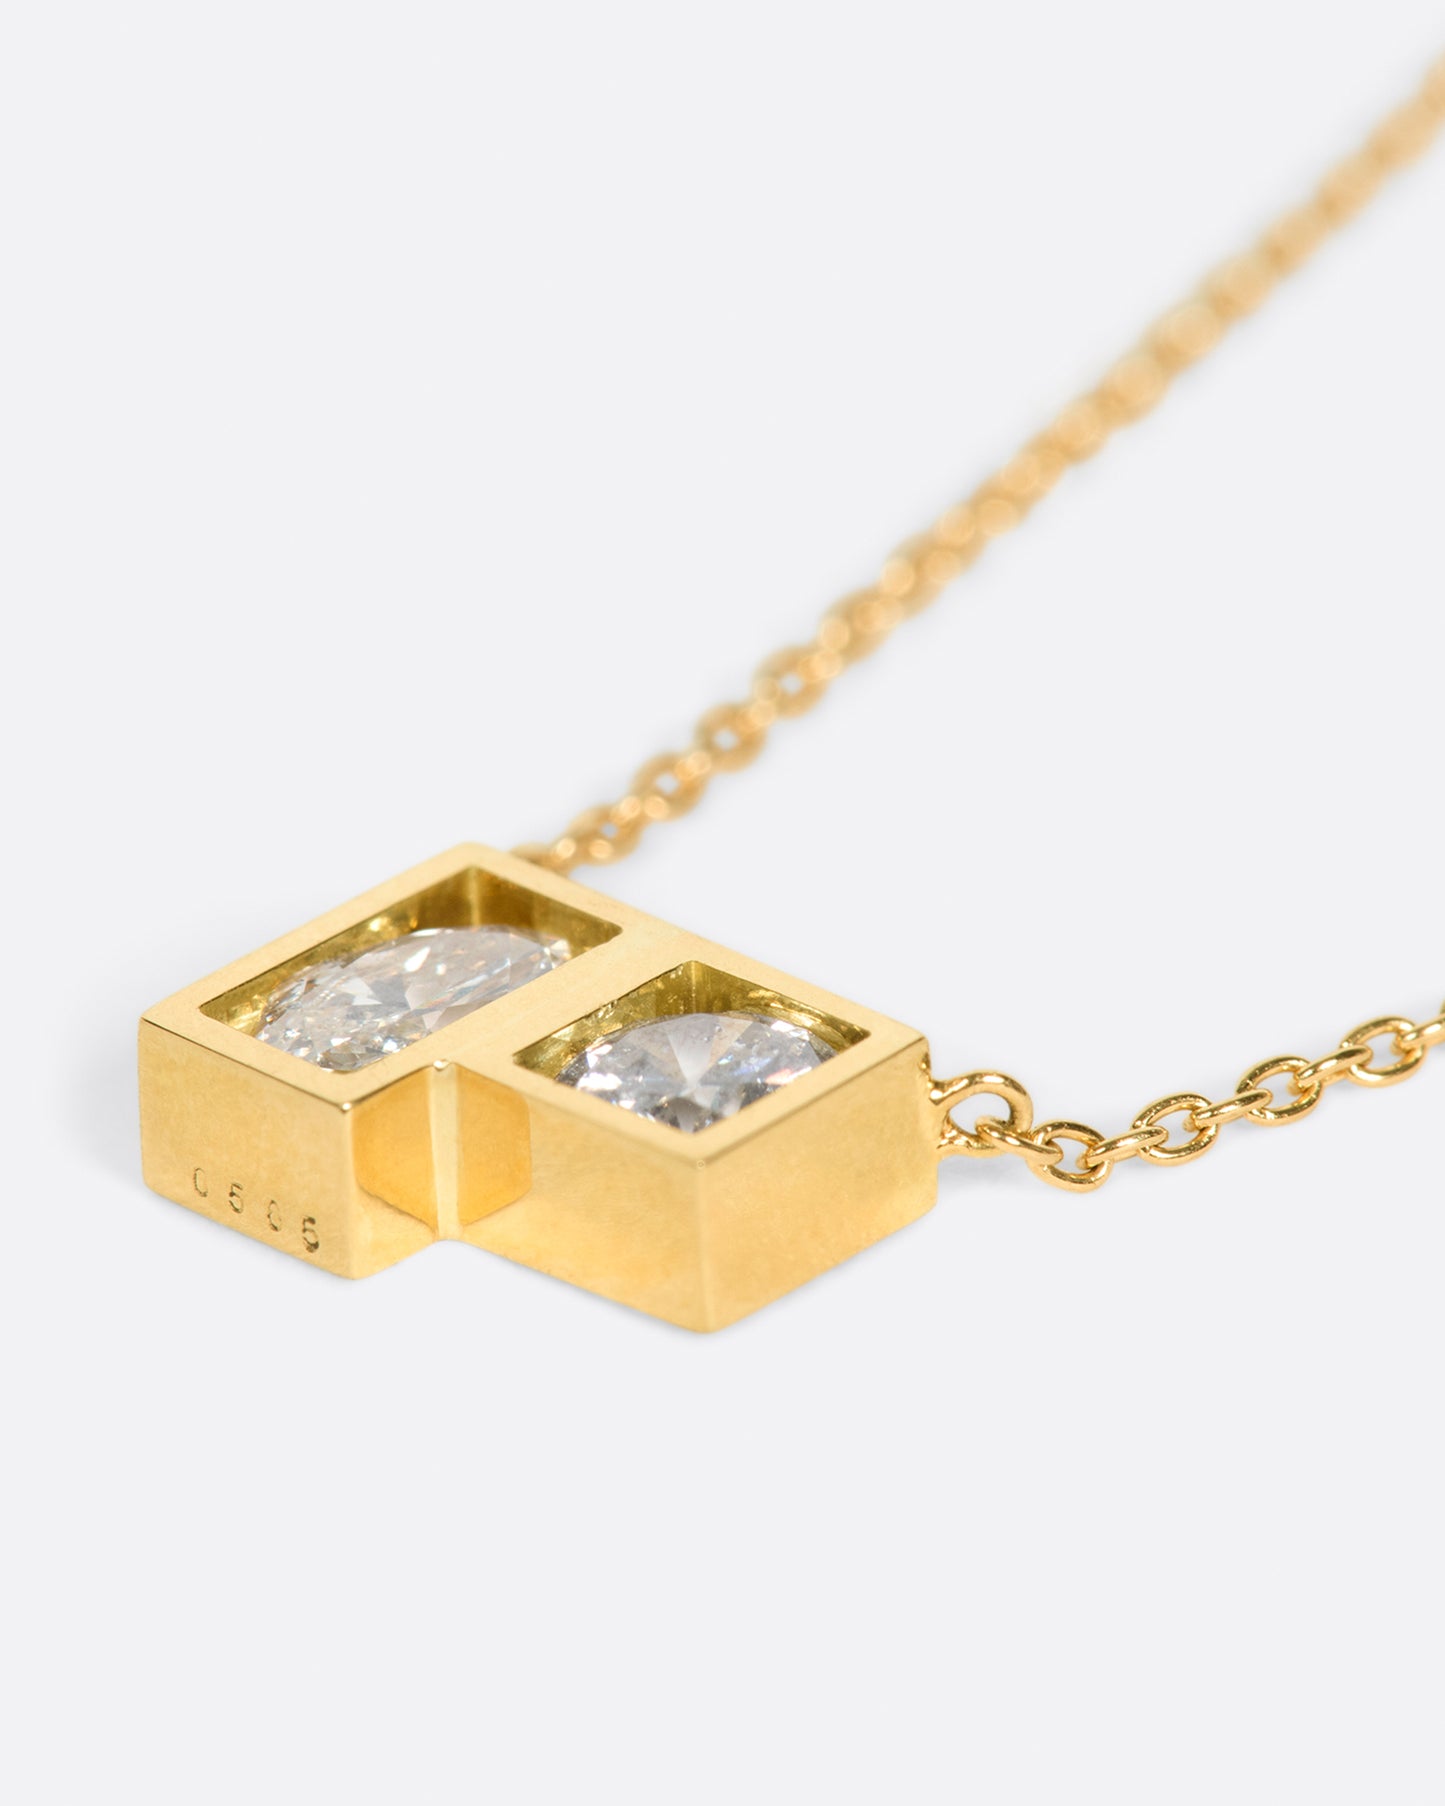 A geometric pendant necklace with two diamonds, shown laying flat.